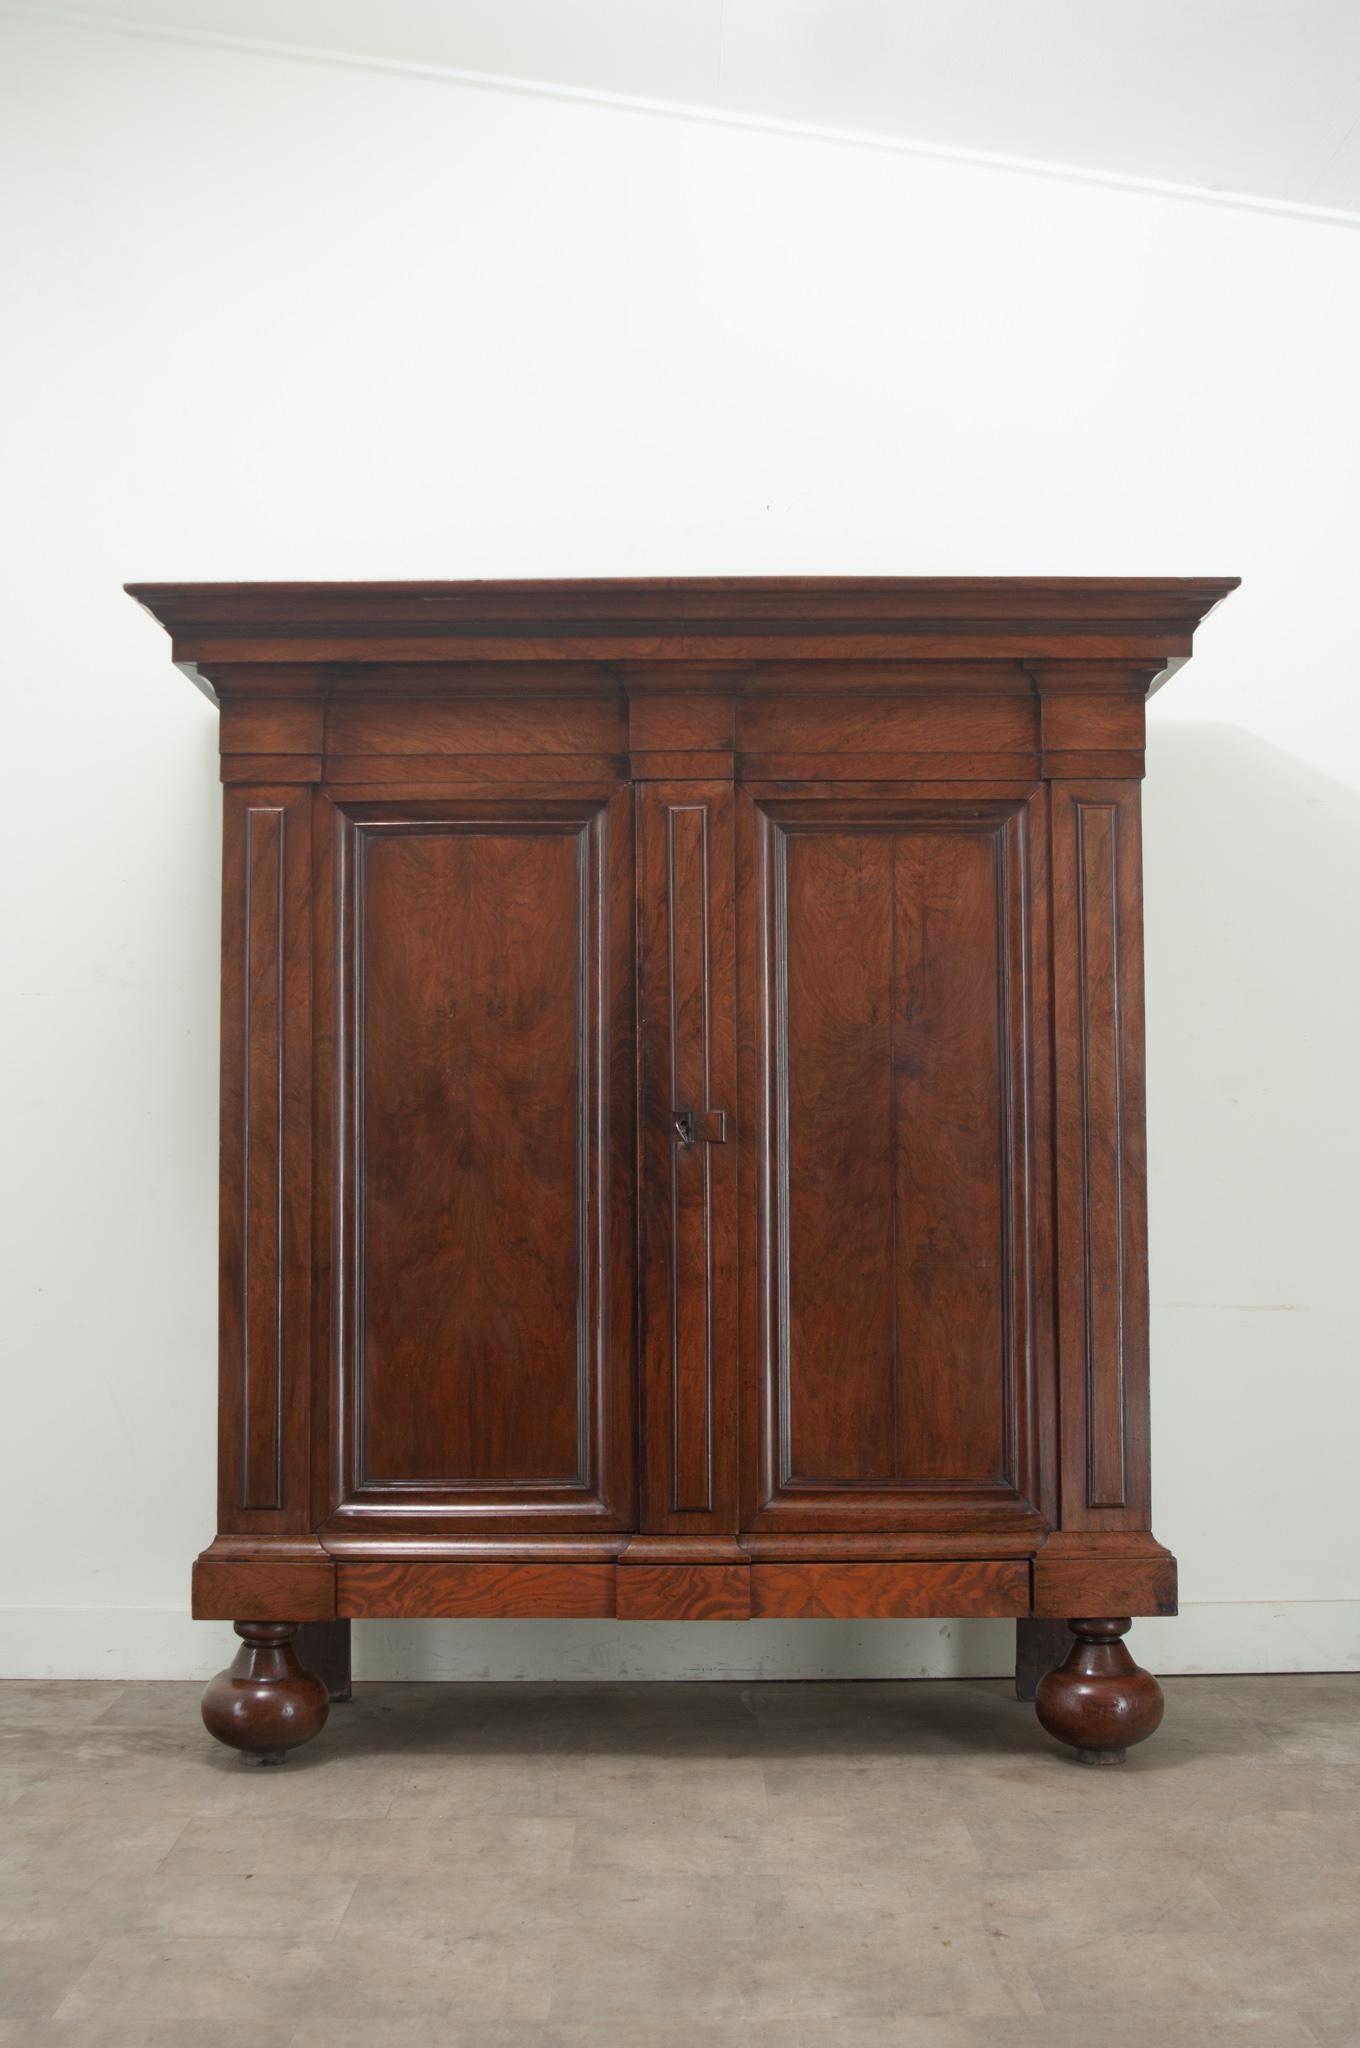 A solid walnut Dutch cabinet made in the Renaissance period. This substantial antique is hand made of solid beautifully figured walnut and makes quite the presence. Two tall paneled doors have a unique sliding key plate with a functioning lock and